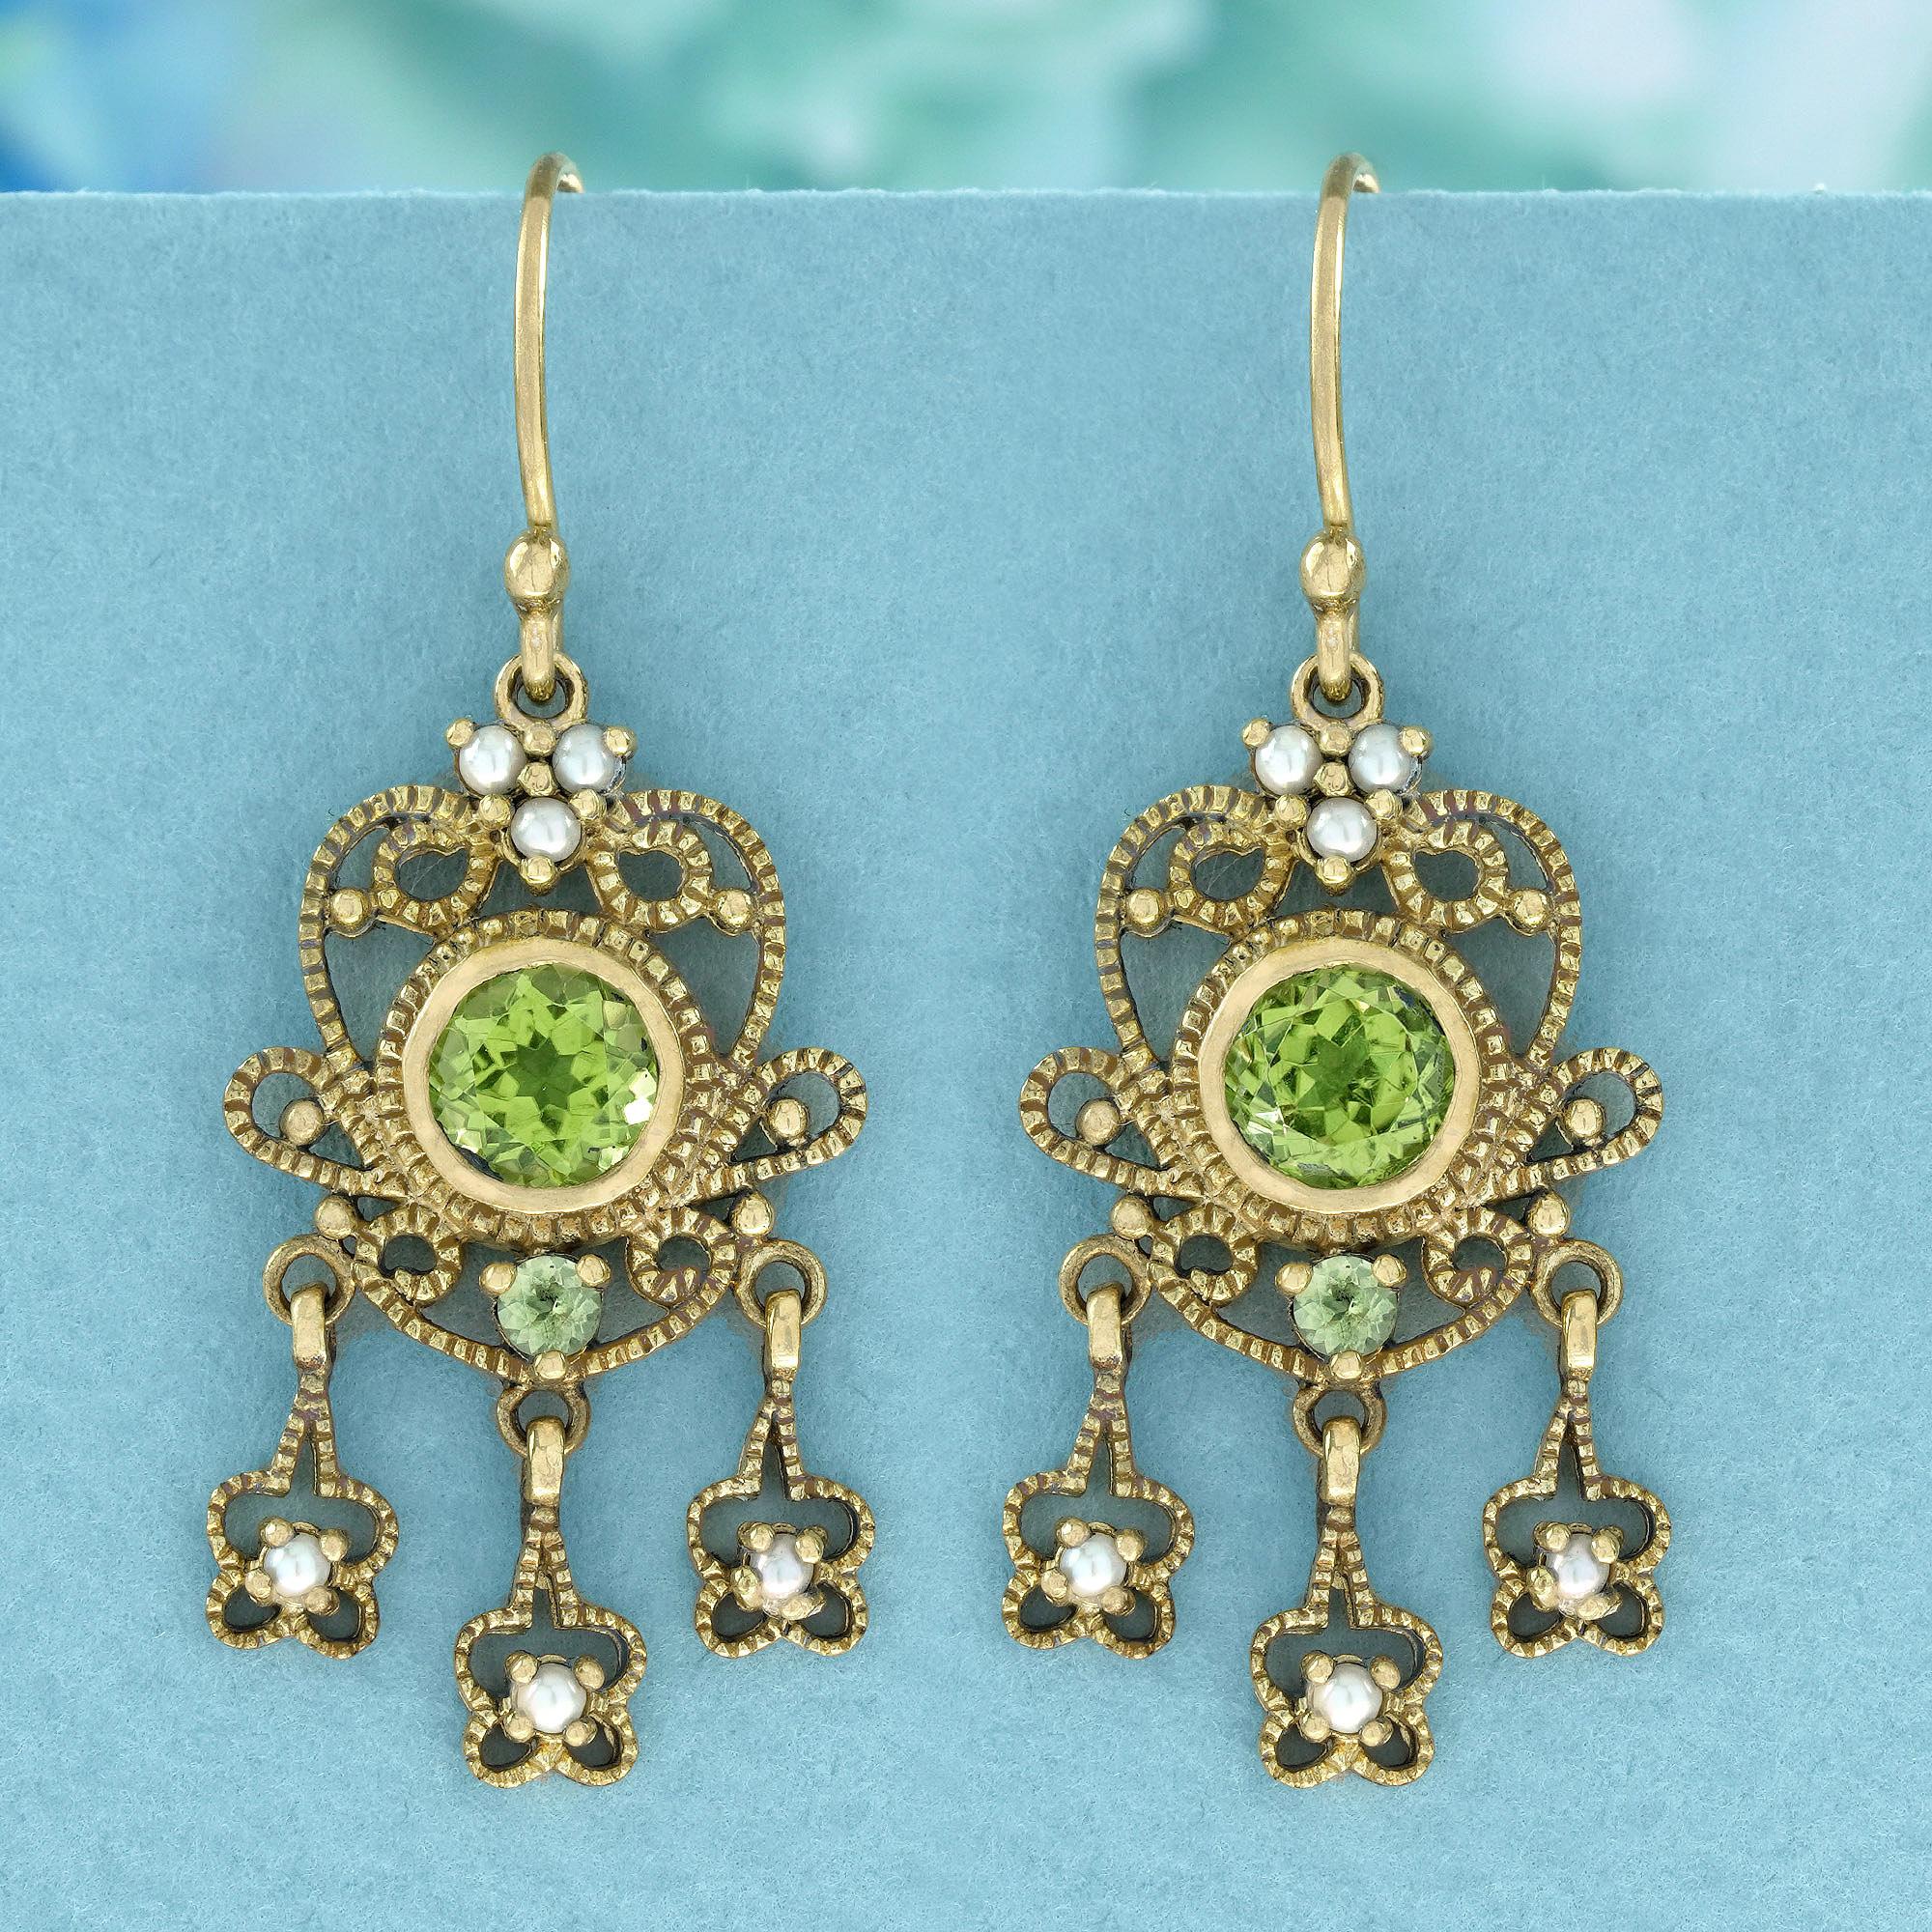 Crafted from luminous yellow gold, these elegant vintage-style earrings boast a Floral Drop dangle design, exuding timeless sophistication. Each earring features a classic silhouette with a cluster of three round pearls at the top, a large round